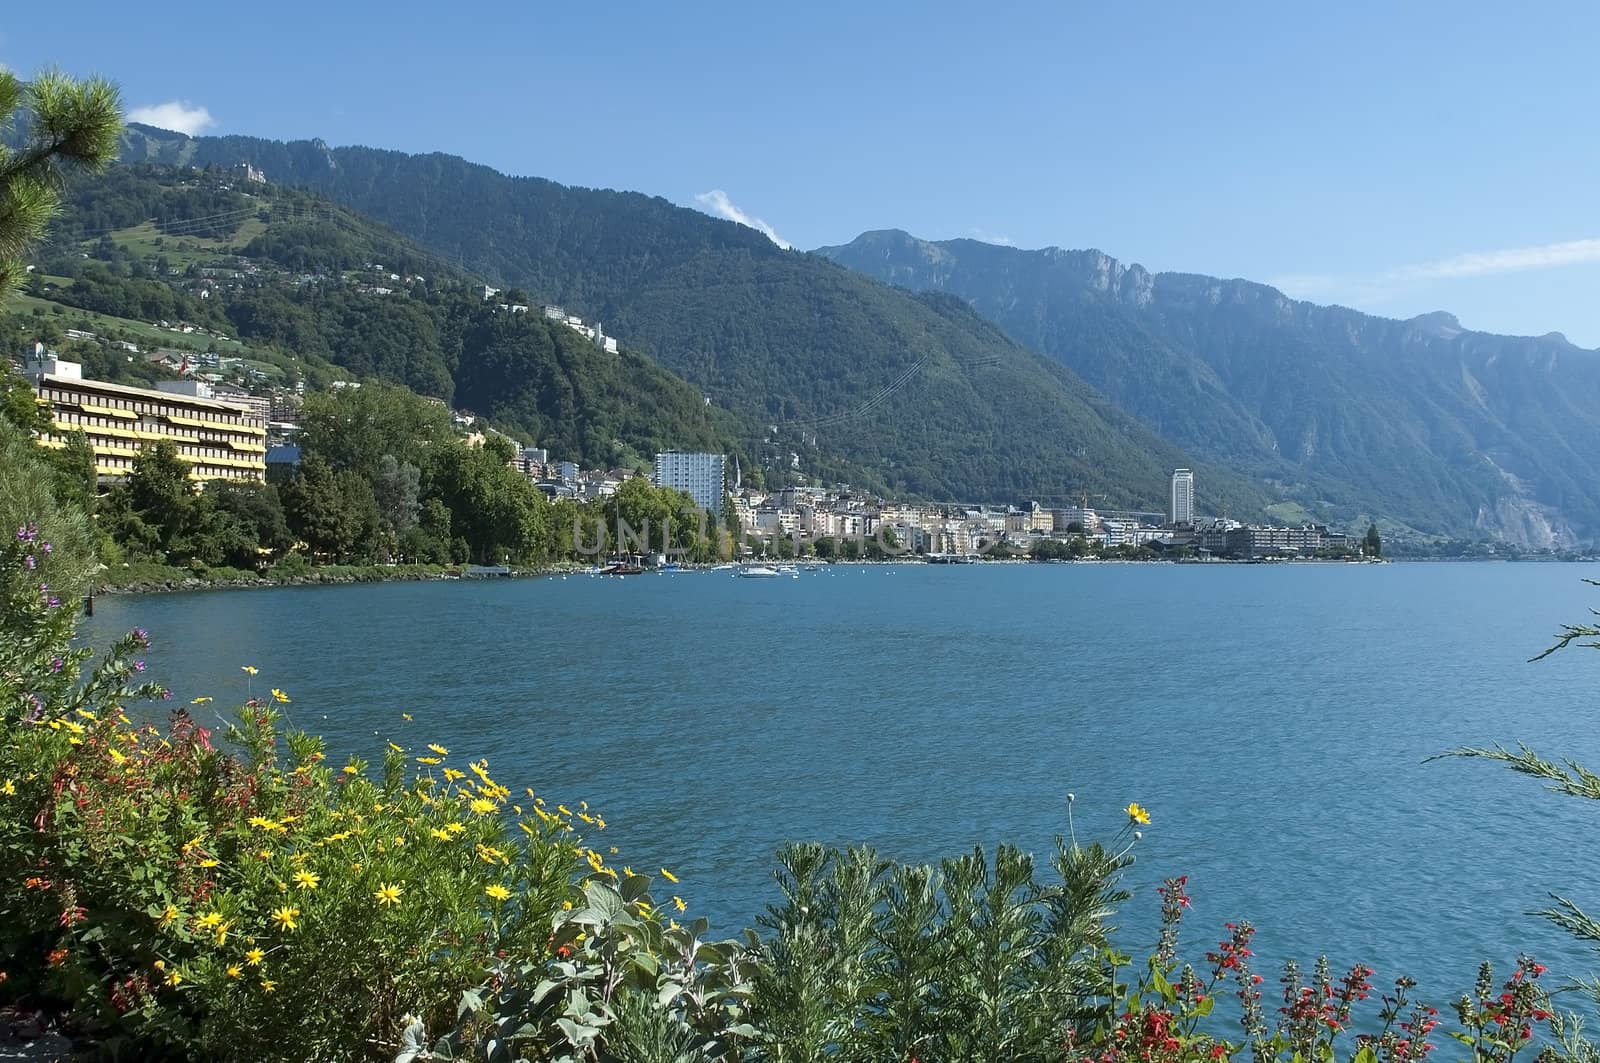 view of the lake and mountains, near the town of Montreux